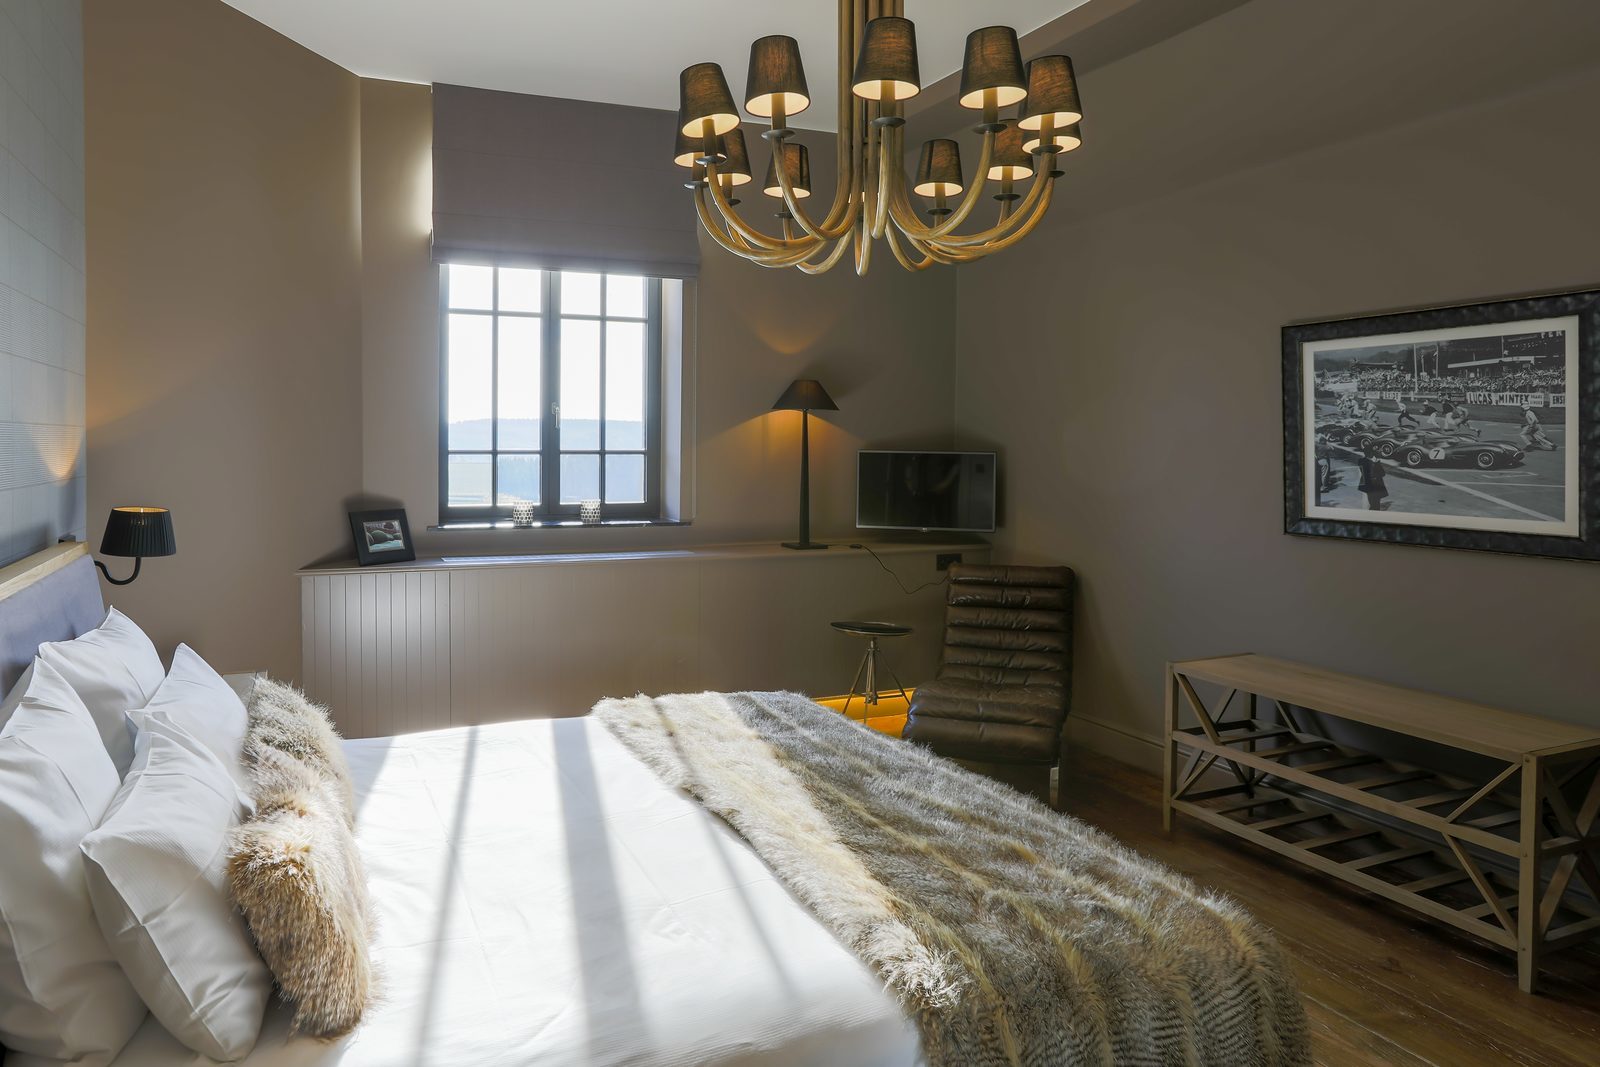 10 chambres luxueuses